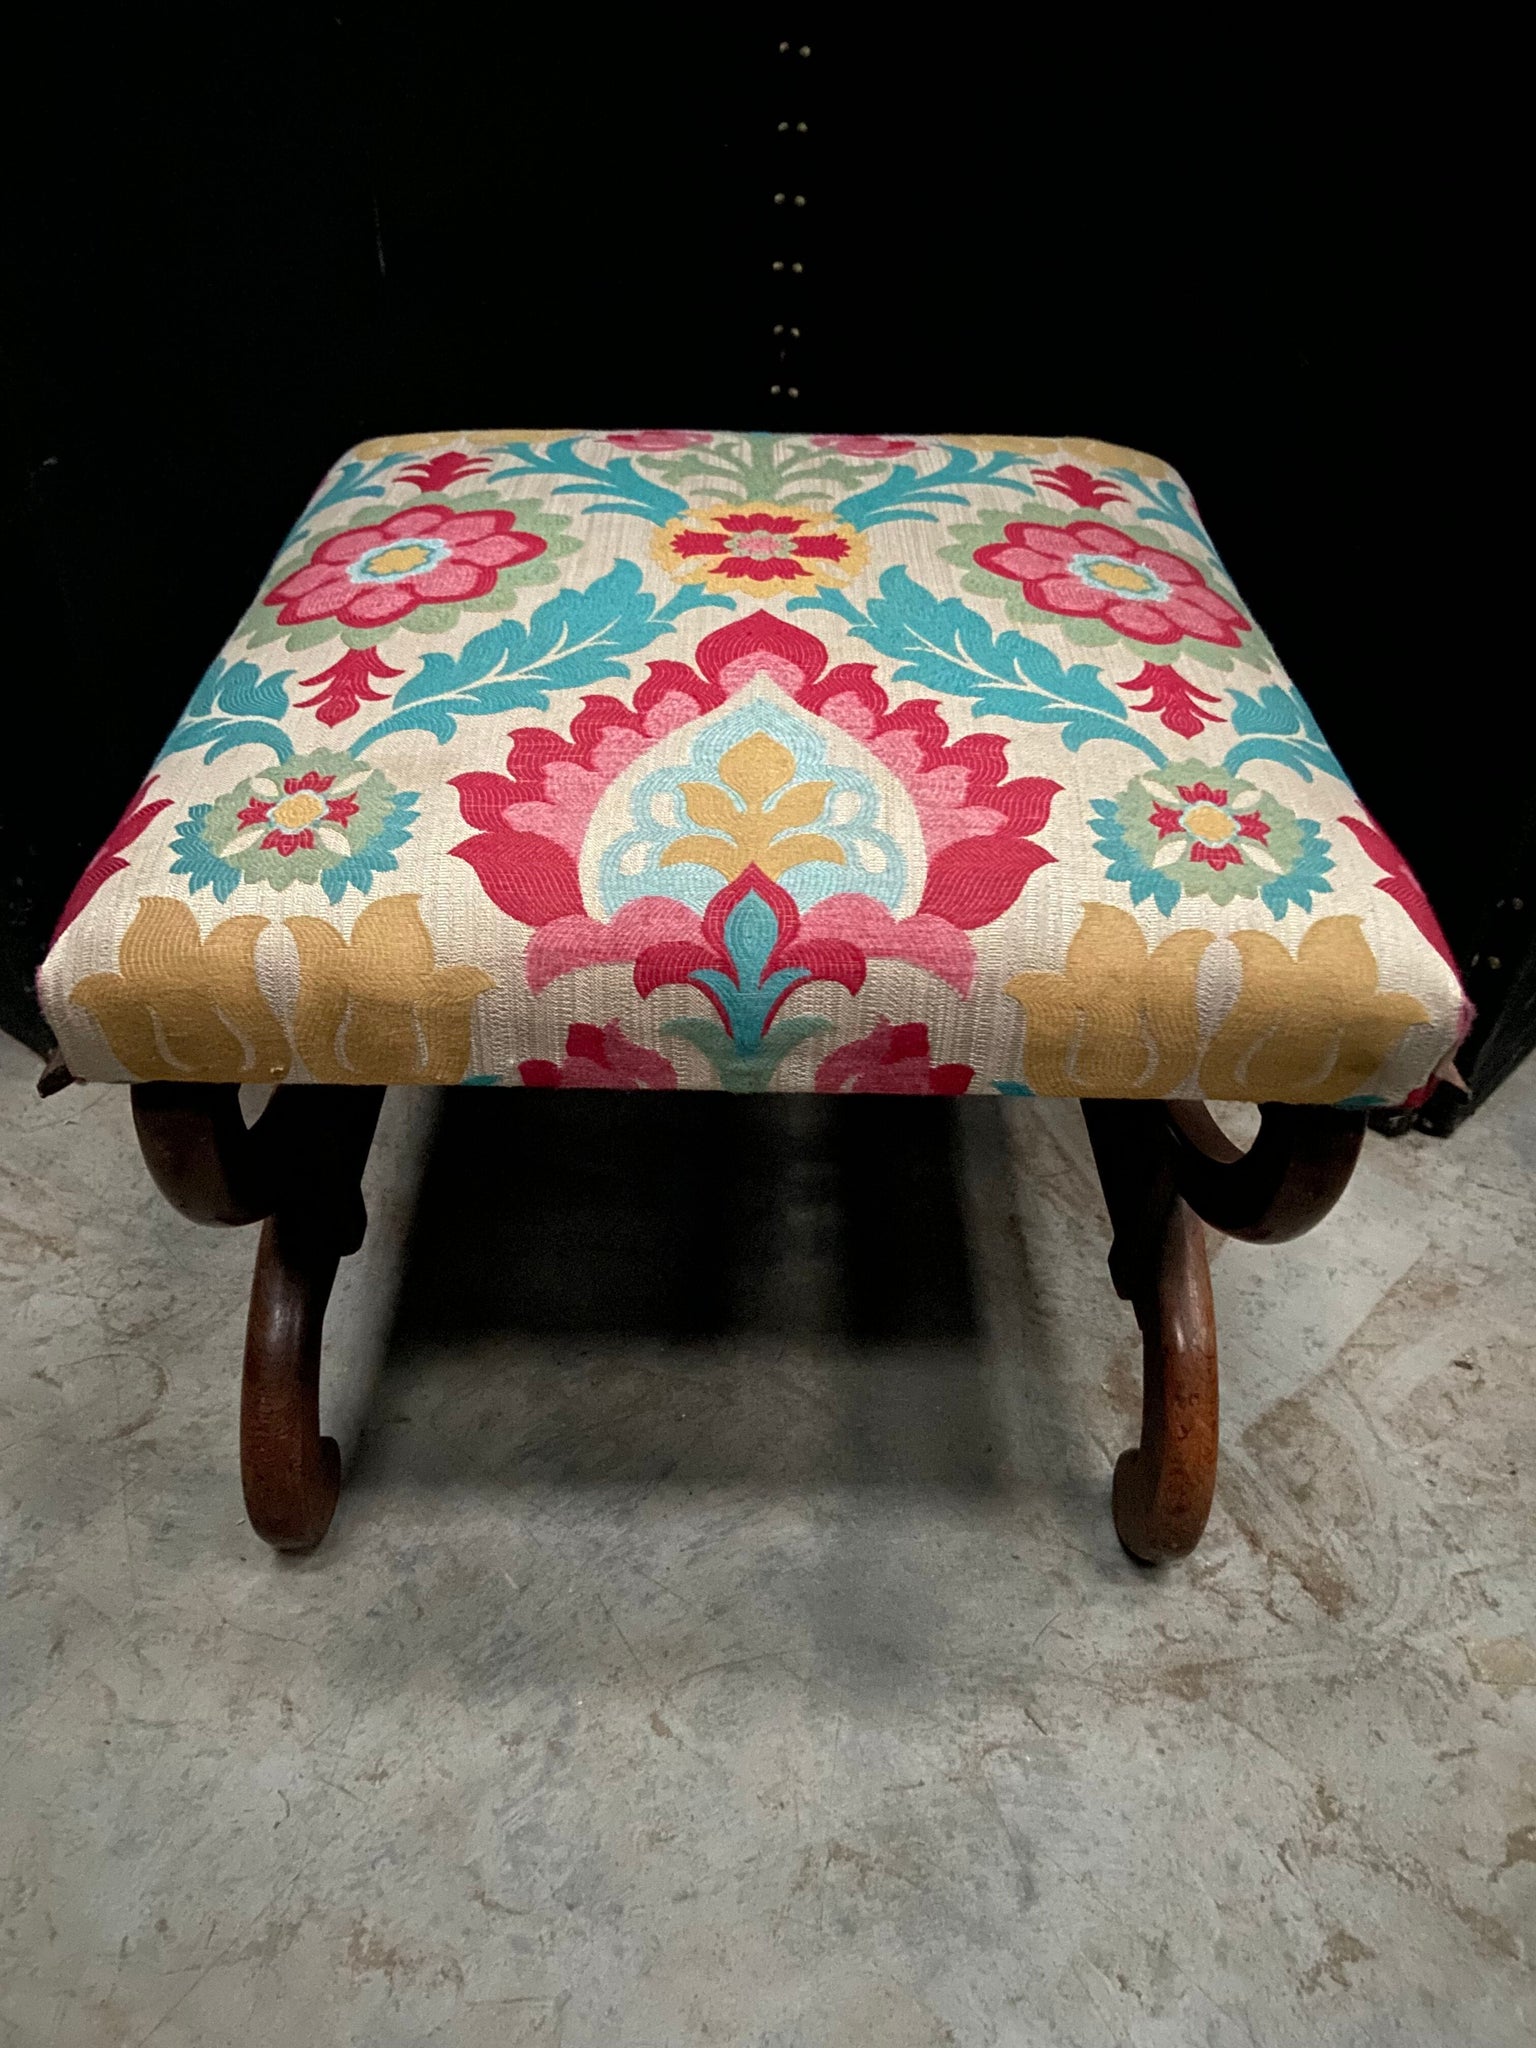 Footstool with Scandinavian Embroidery